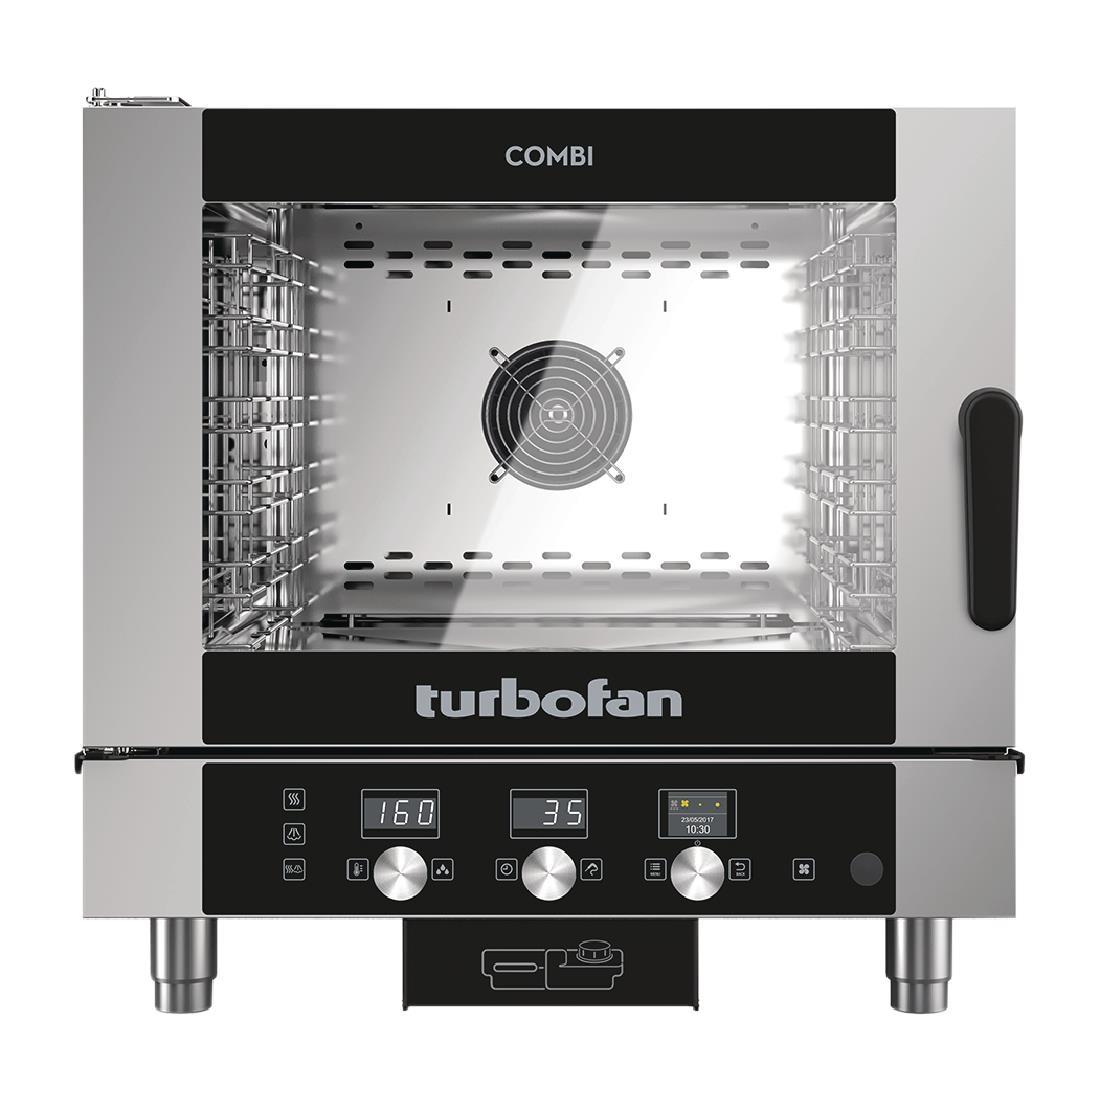 Blue Seal Turbofan 5 Grid Touch Control Combi Oven With Auto Wash EC40D5 - HC002  - 1